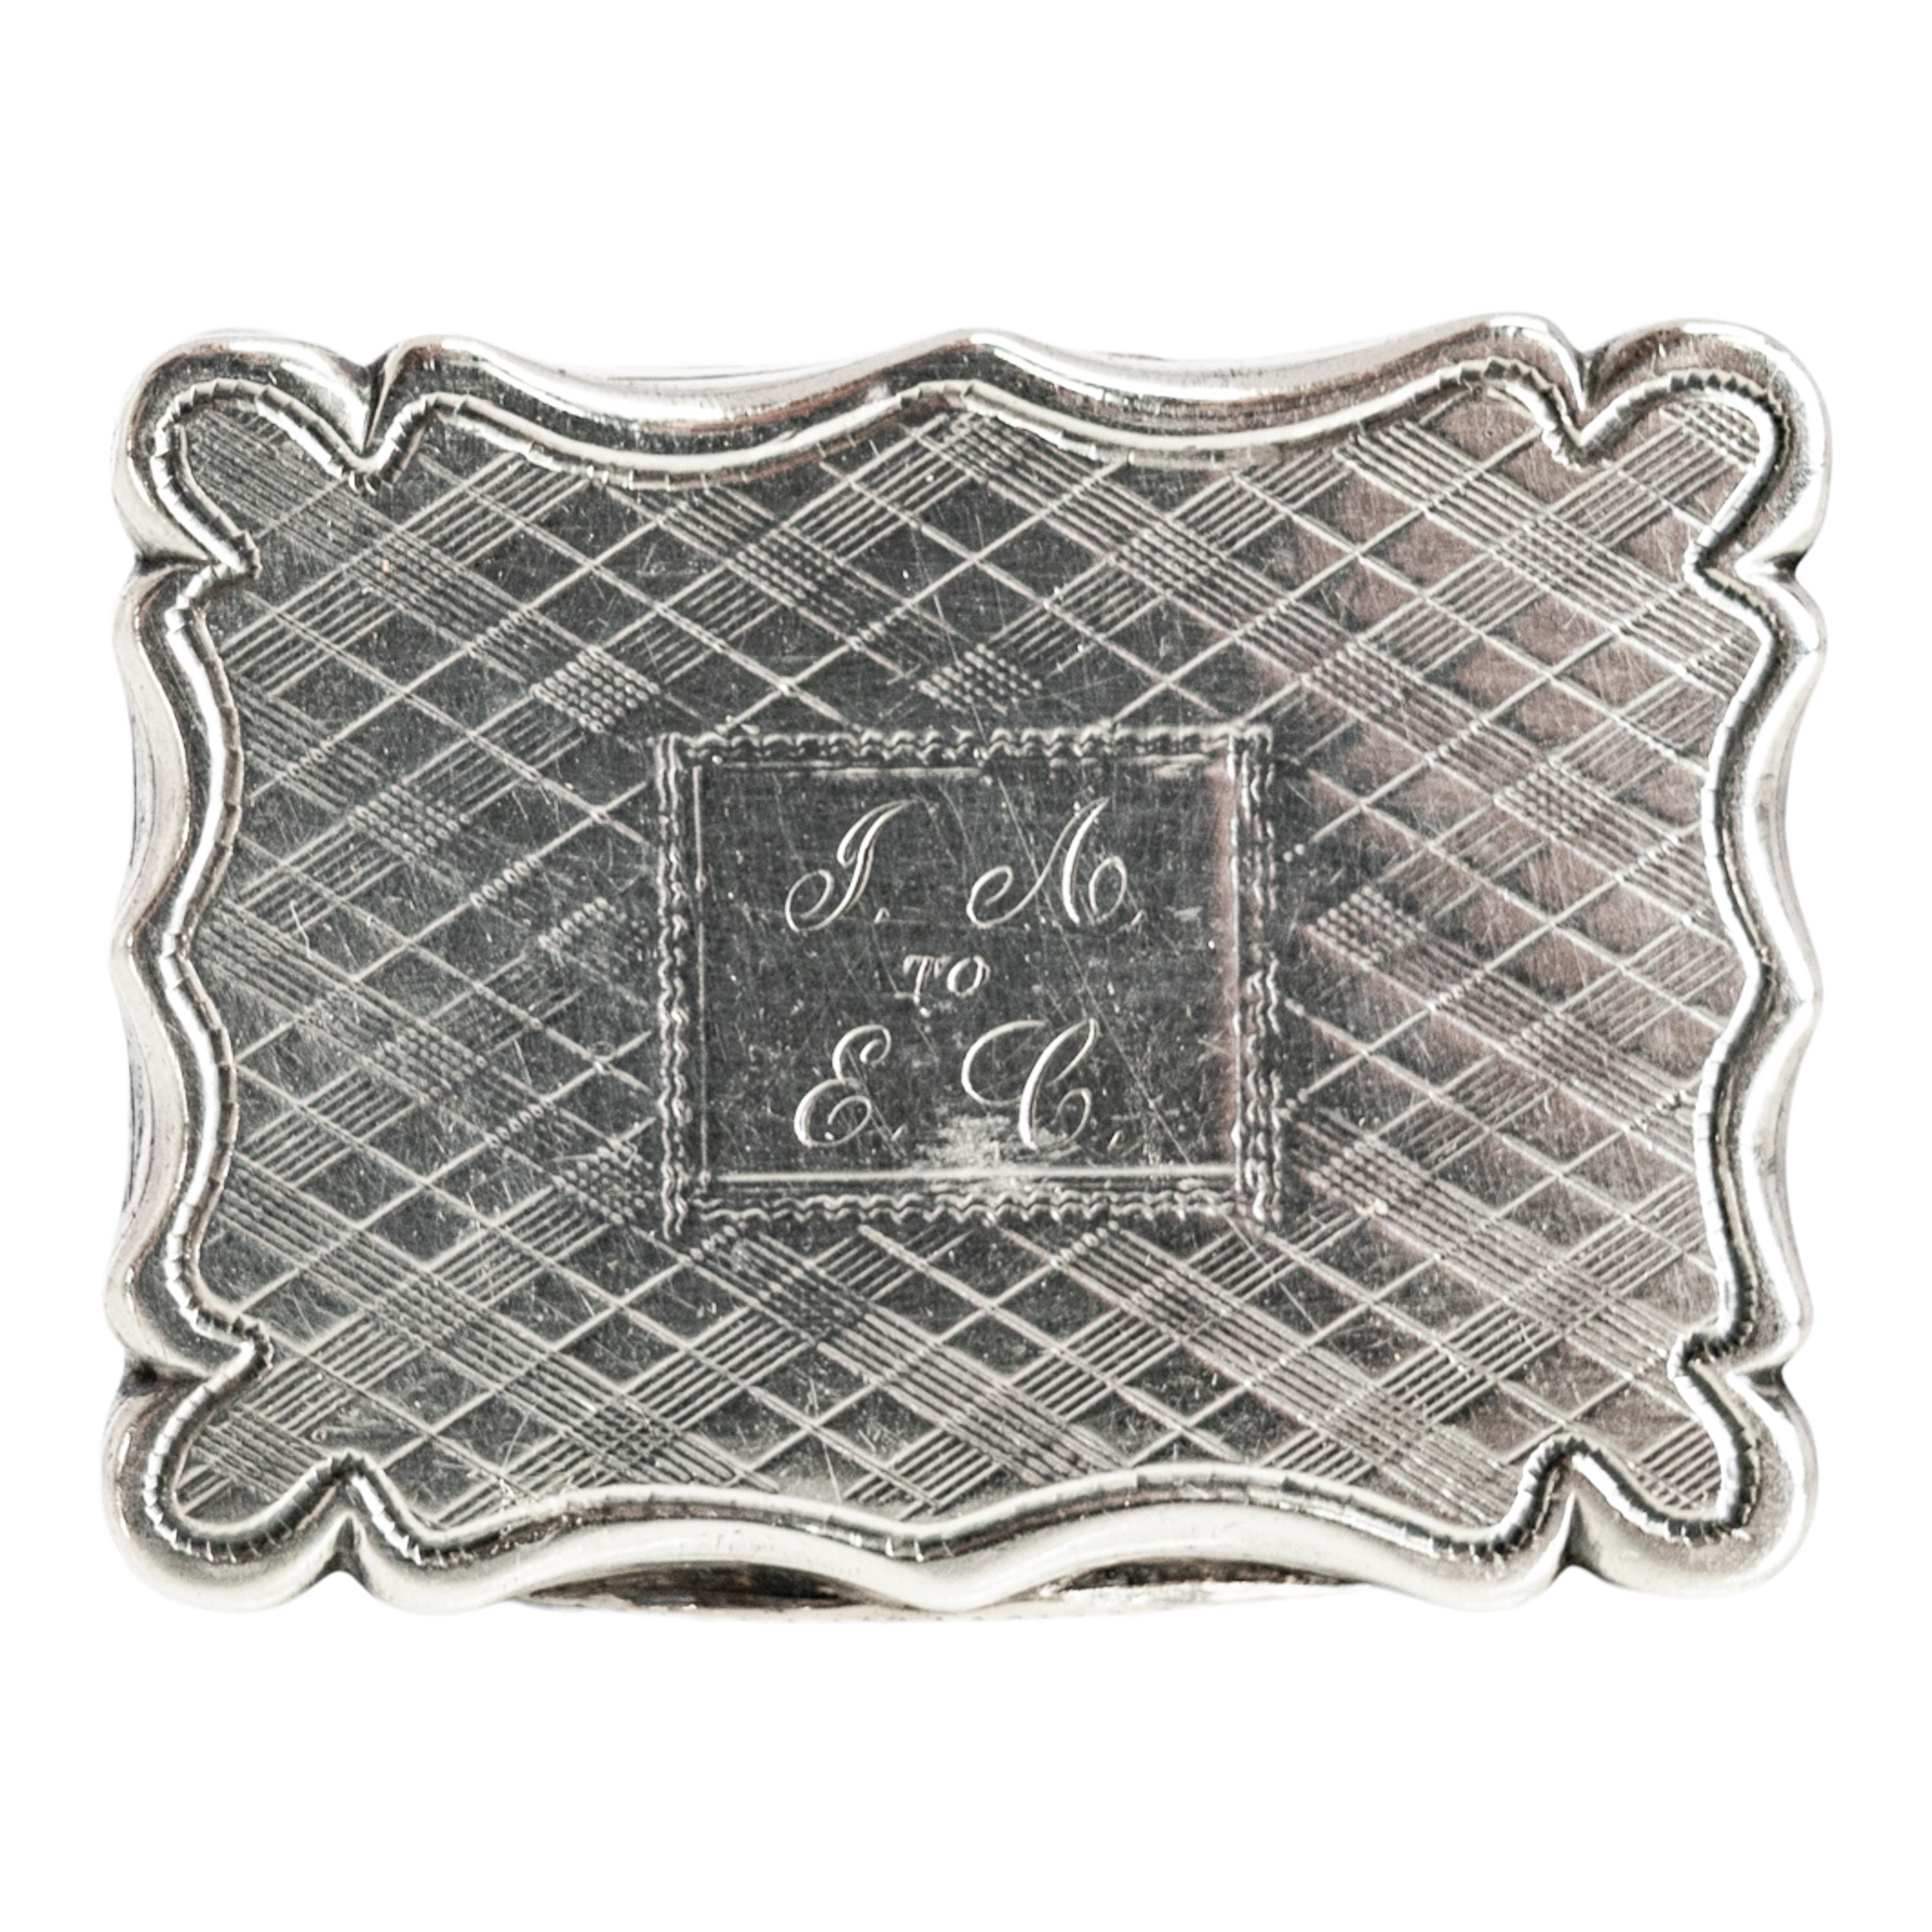 A fine antique engraved sterling silver vinaigrette, Edward Smith, Birmingham, 1839.
The vinaigrette is finely engine turned to the hinged top and the undersaide, the lid is monogramed engraved with 